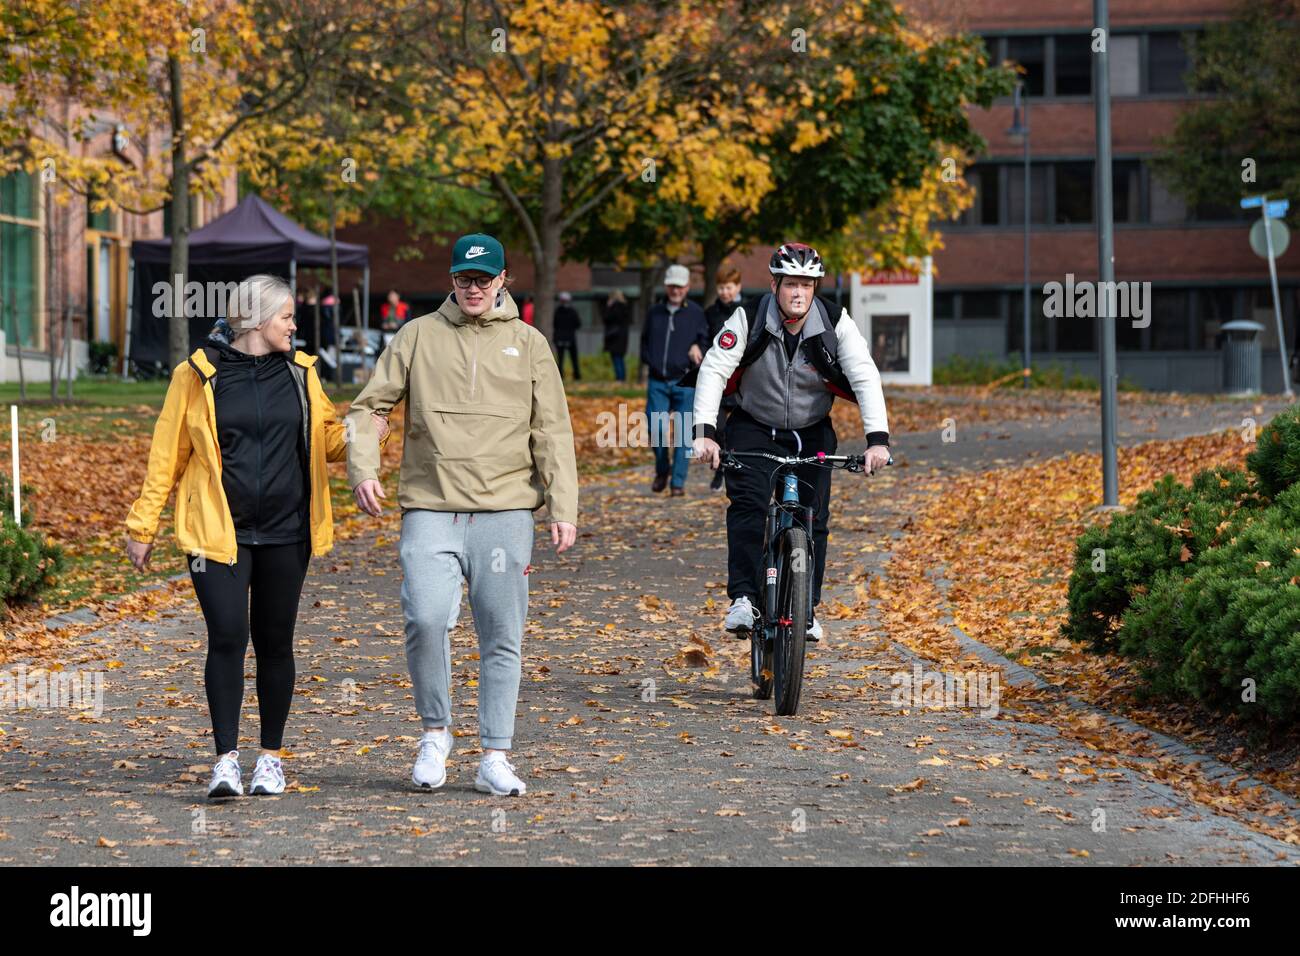 People strolling and cycling at Tampella area in Tampere, Finland Stock Photo